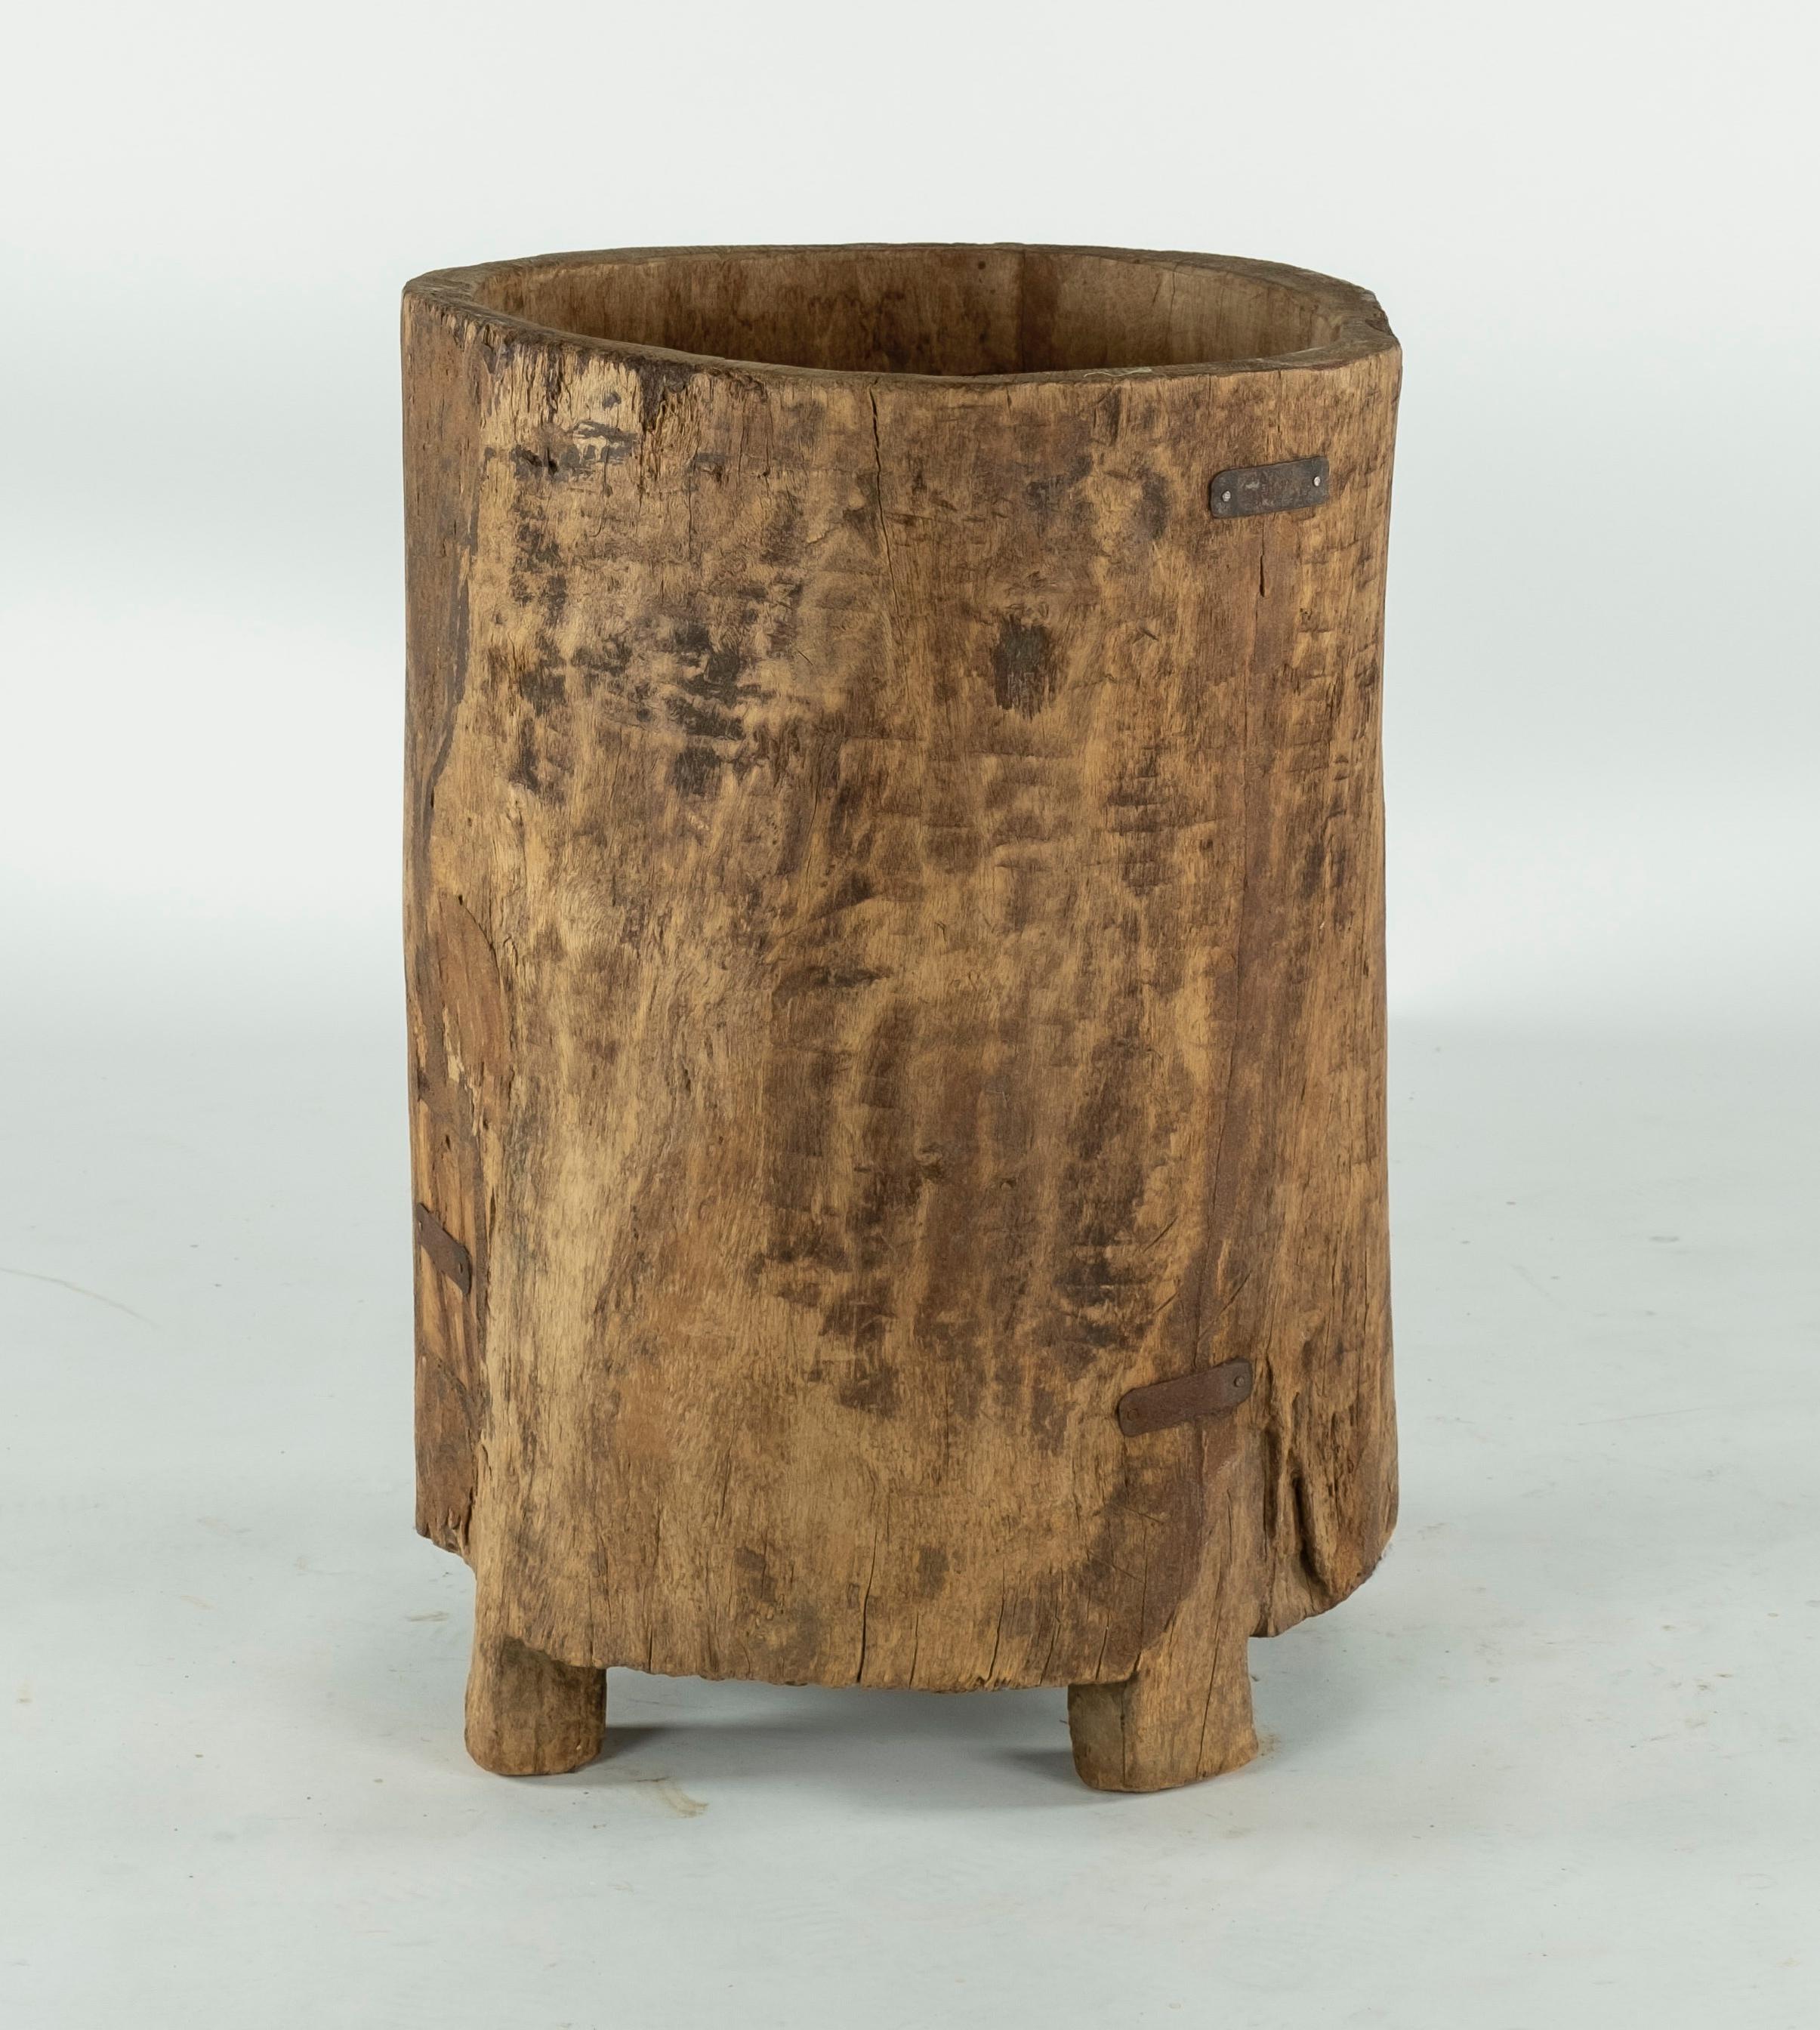 19th century Hollowed teak container. Can be used to store firewood or as a planter.